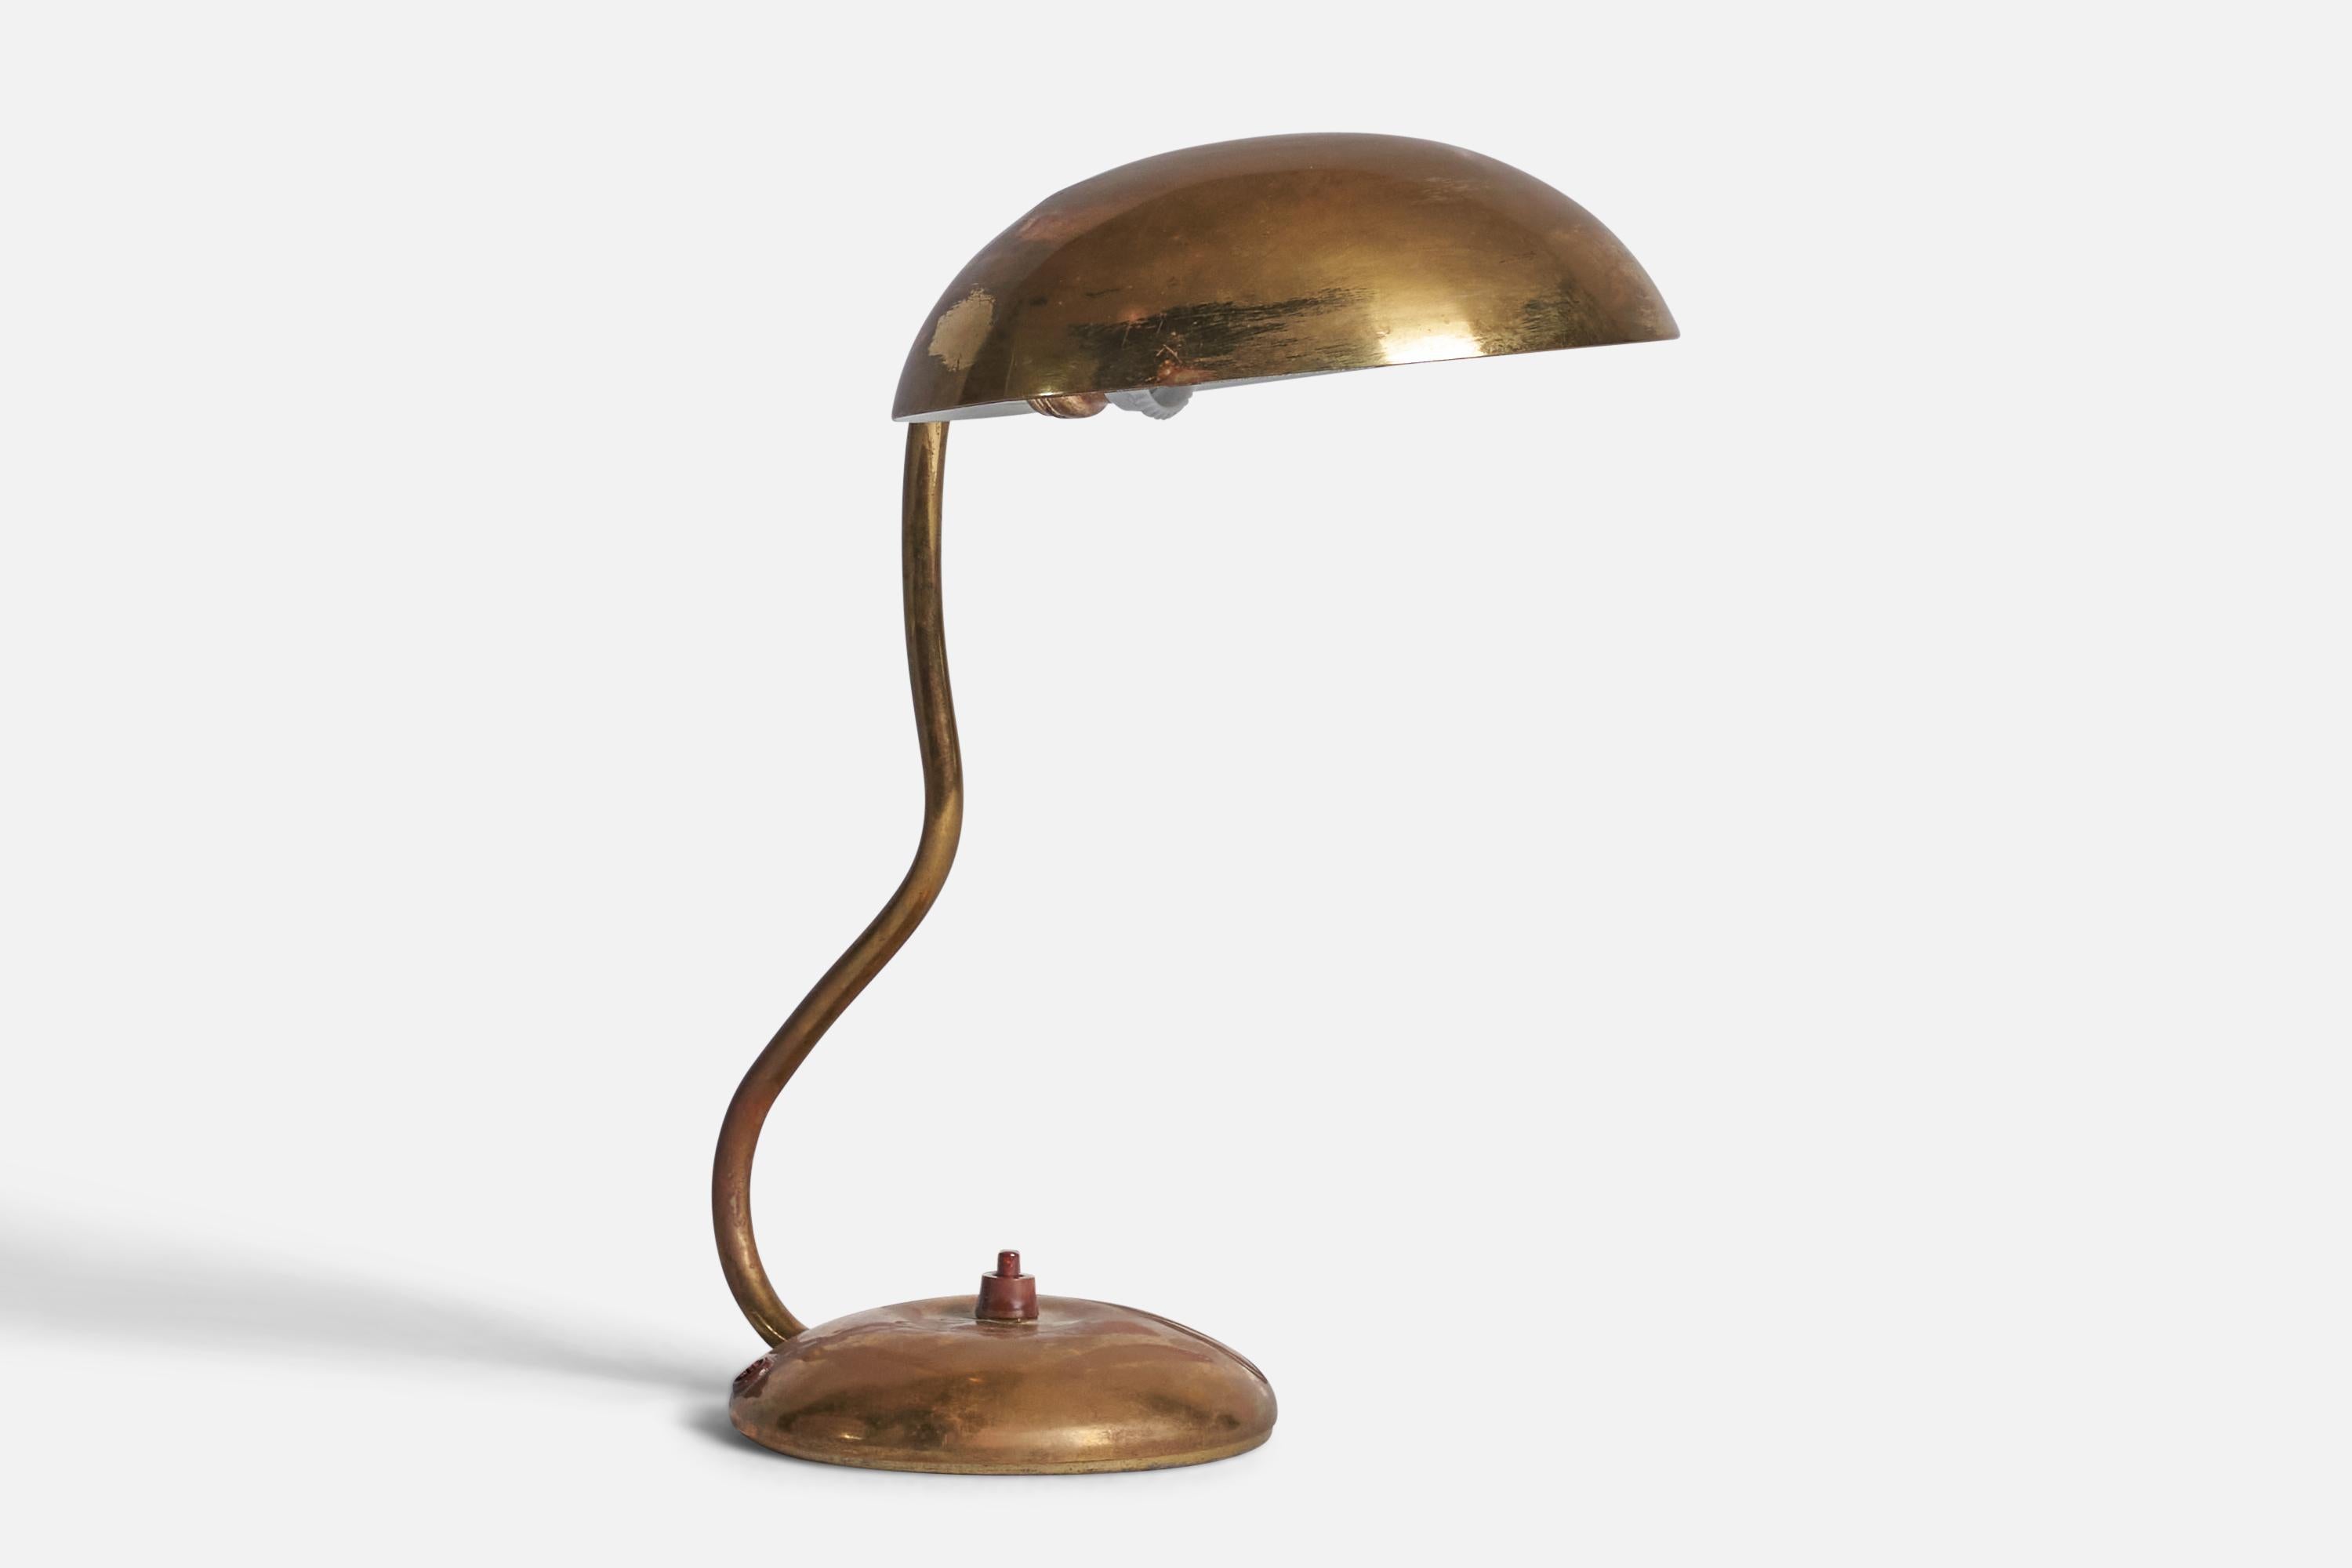 
An adjustable brass table lamp designed and produced by Valinte OY, Finland, 1940s.
Overall Dimensions (inches): 12.15” H x 7.15” W x 11.35” D
Dimensions variable based on position of light.
Bulb Specifications: E-14 Bulb
Number of Sockets: 1
All